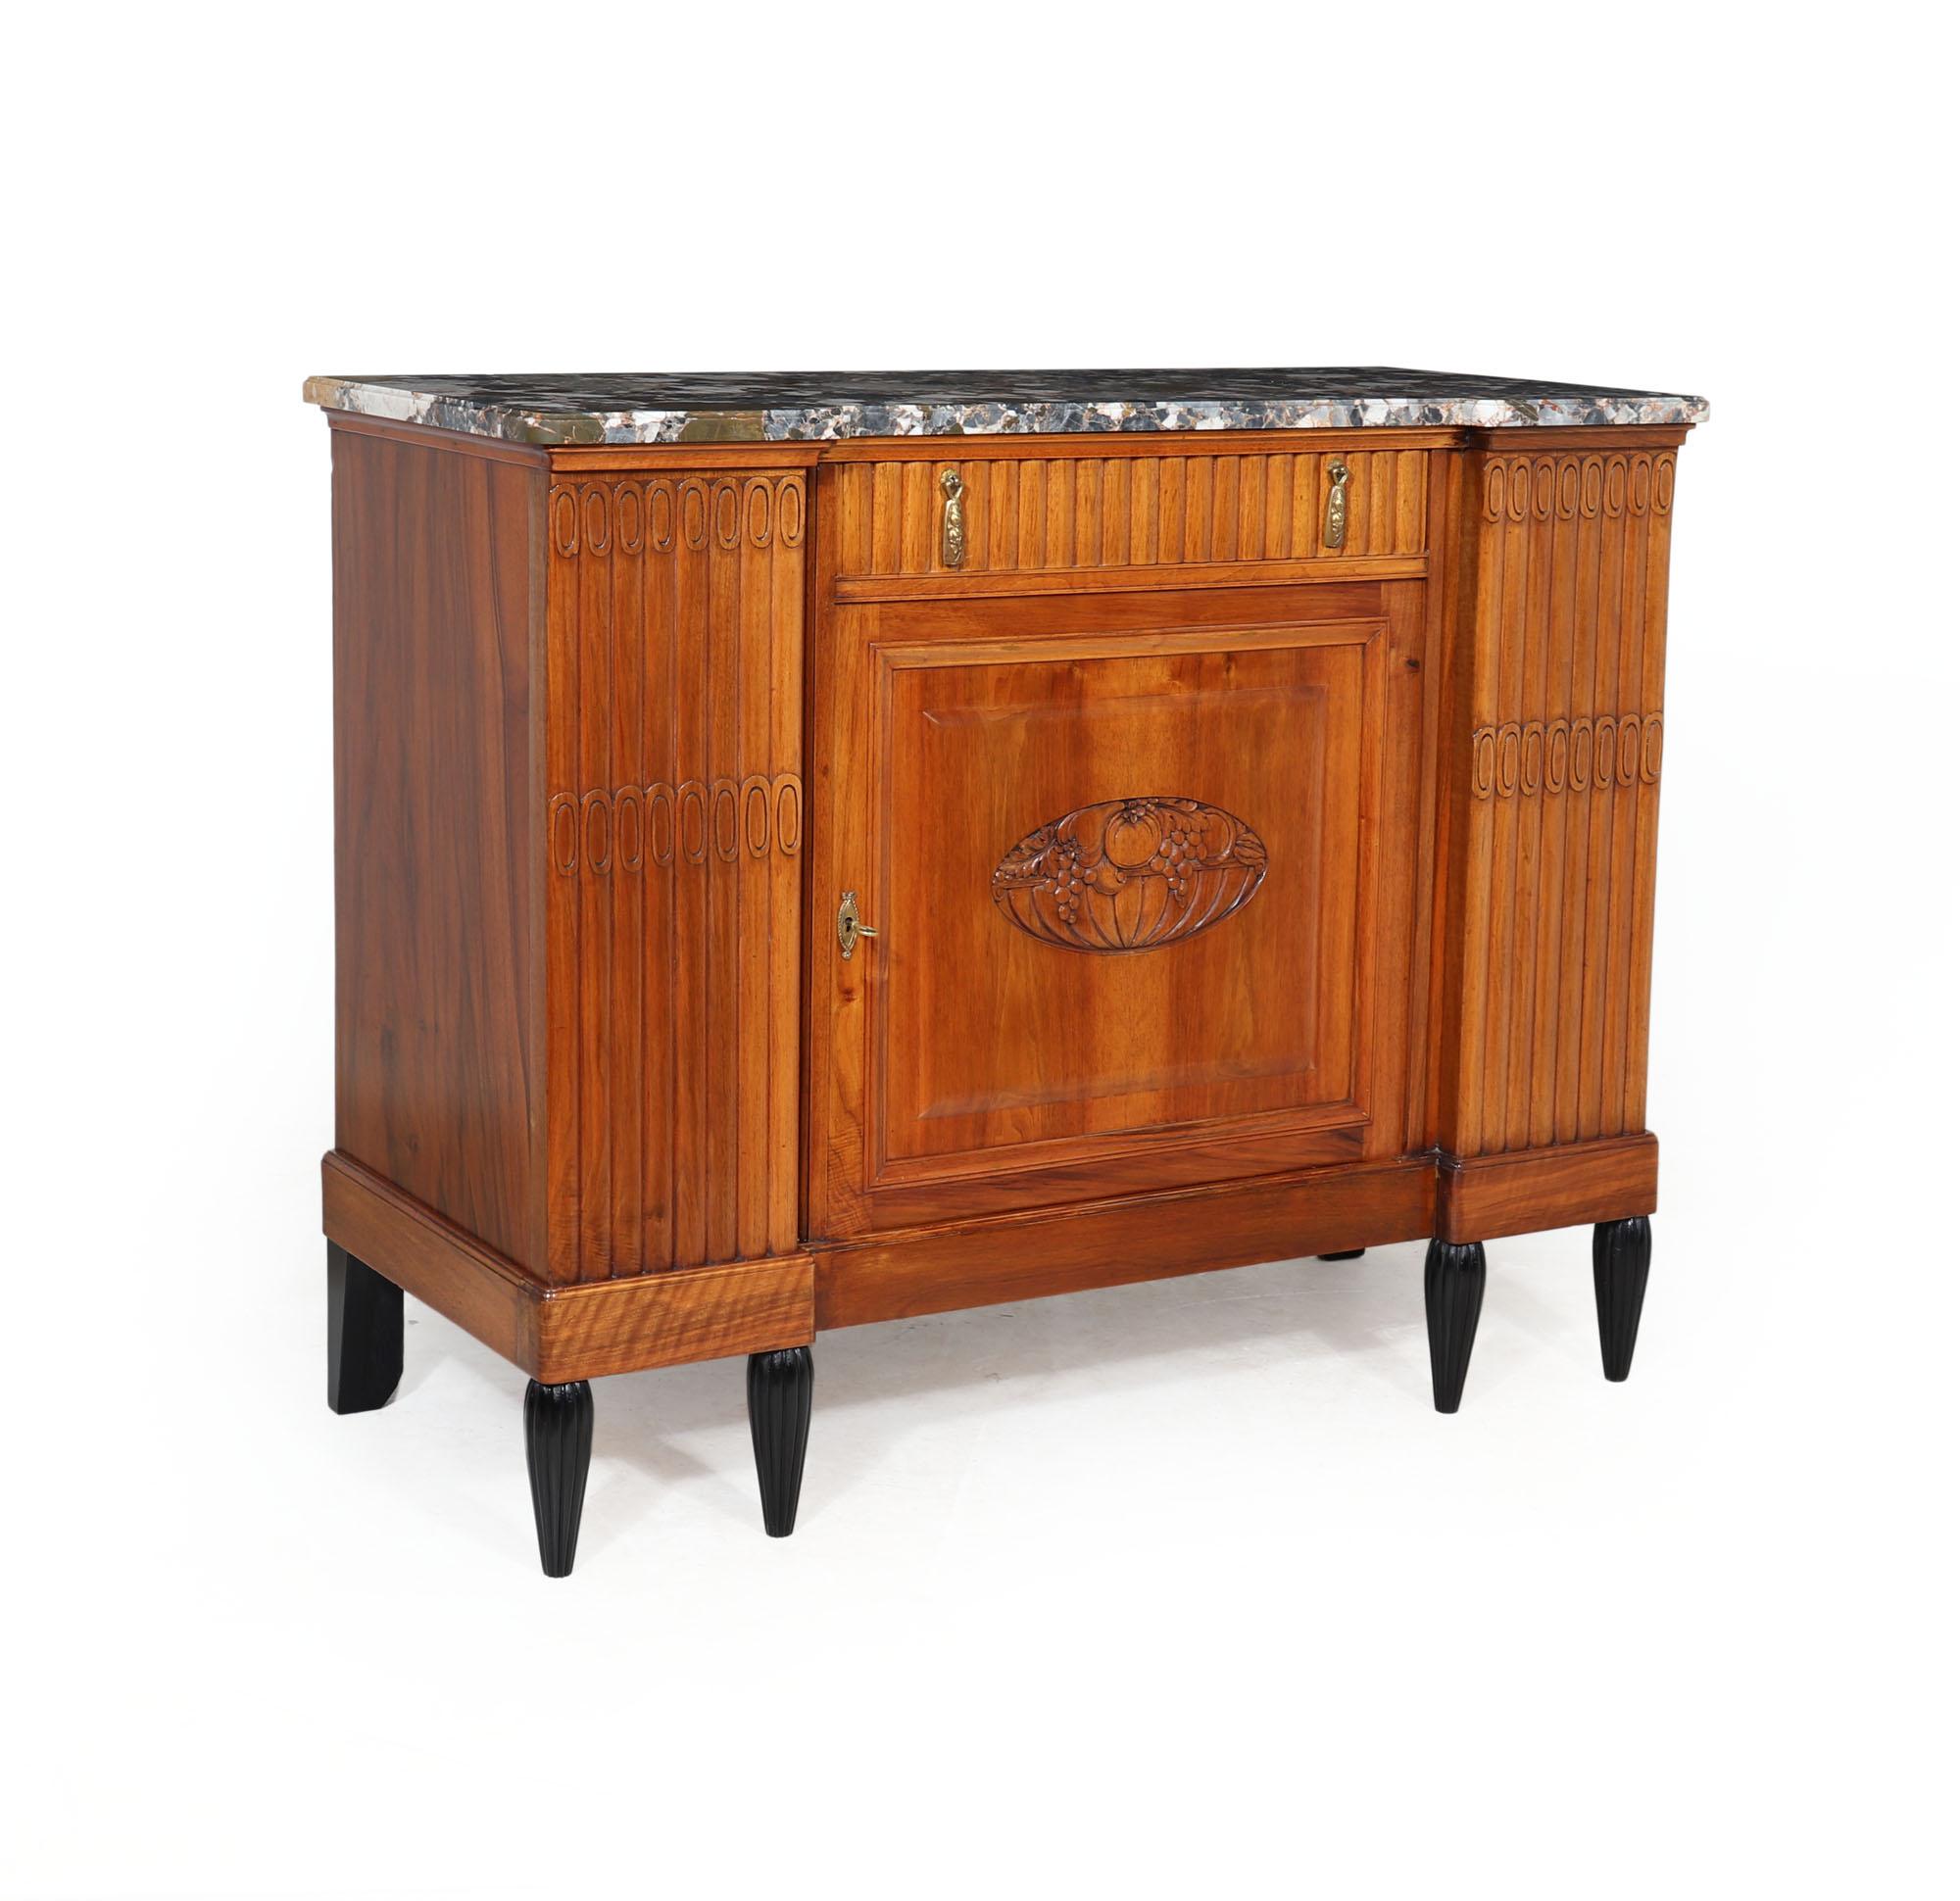 A great quality French Art Deco sideboard in solid oak and solid walnut, having a marble top with single drawer and cupboard below, reeded detail sides and drawer with gilded bronze hardware, the central cupboard has crisply carved fruit bowl